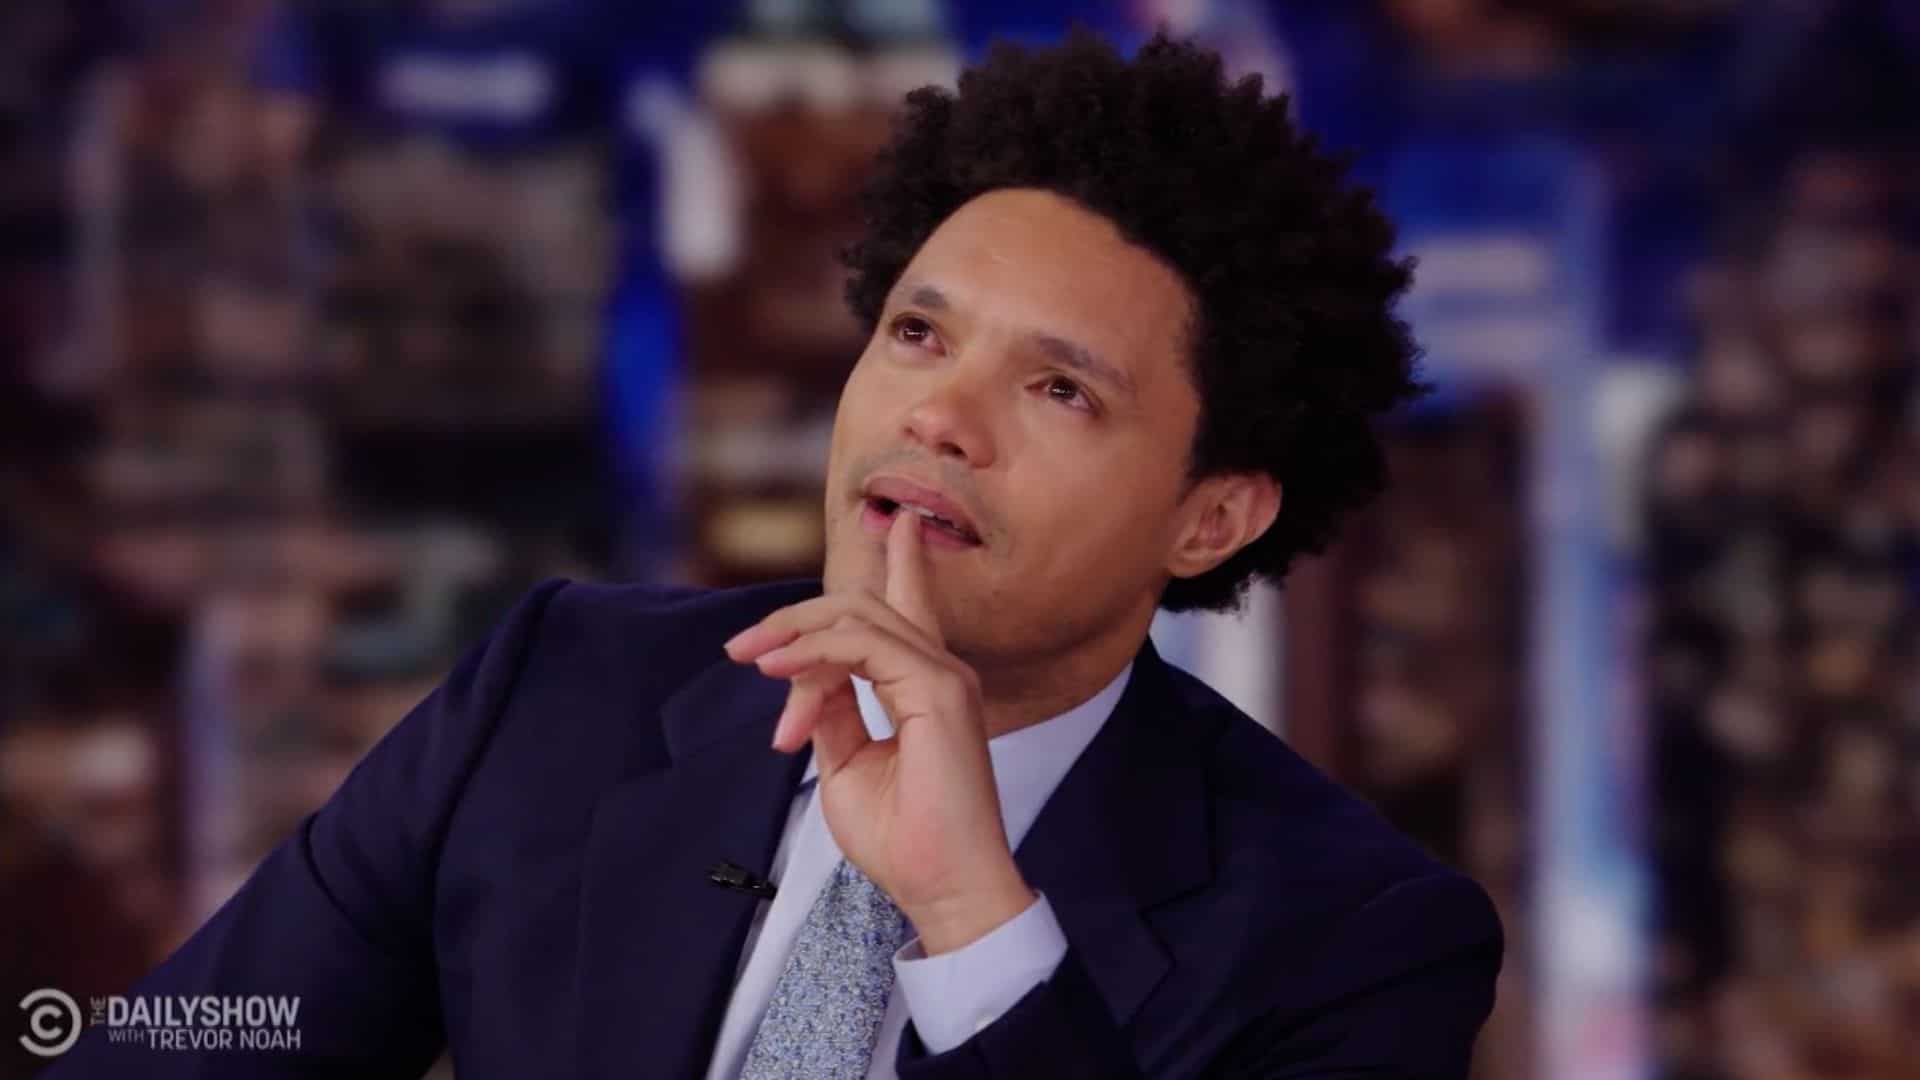 Why Did Trever Noah Leave The Daily Show?